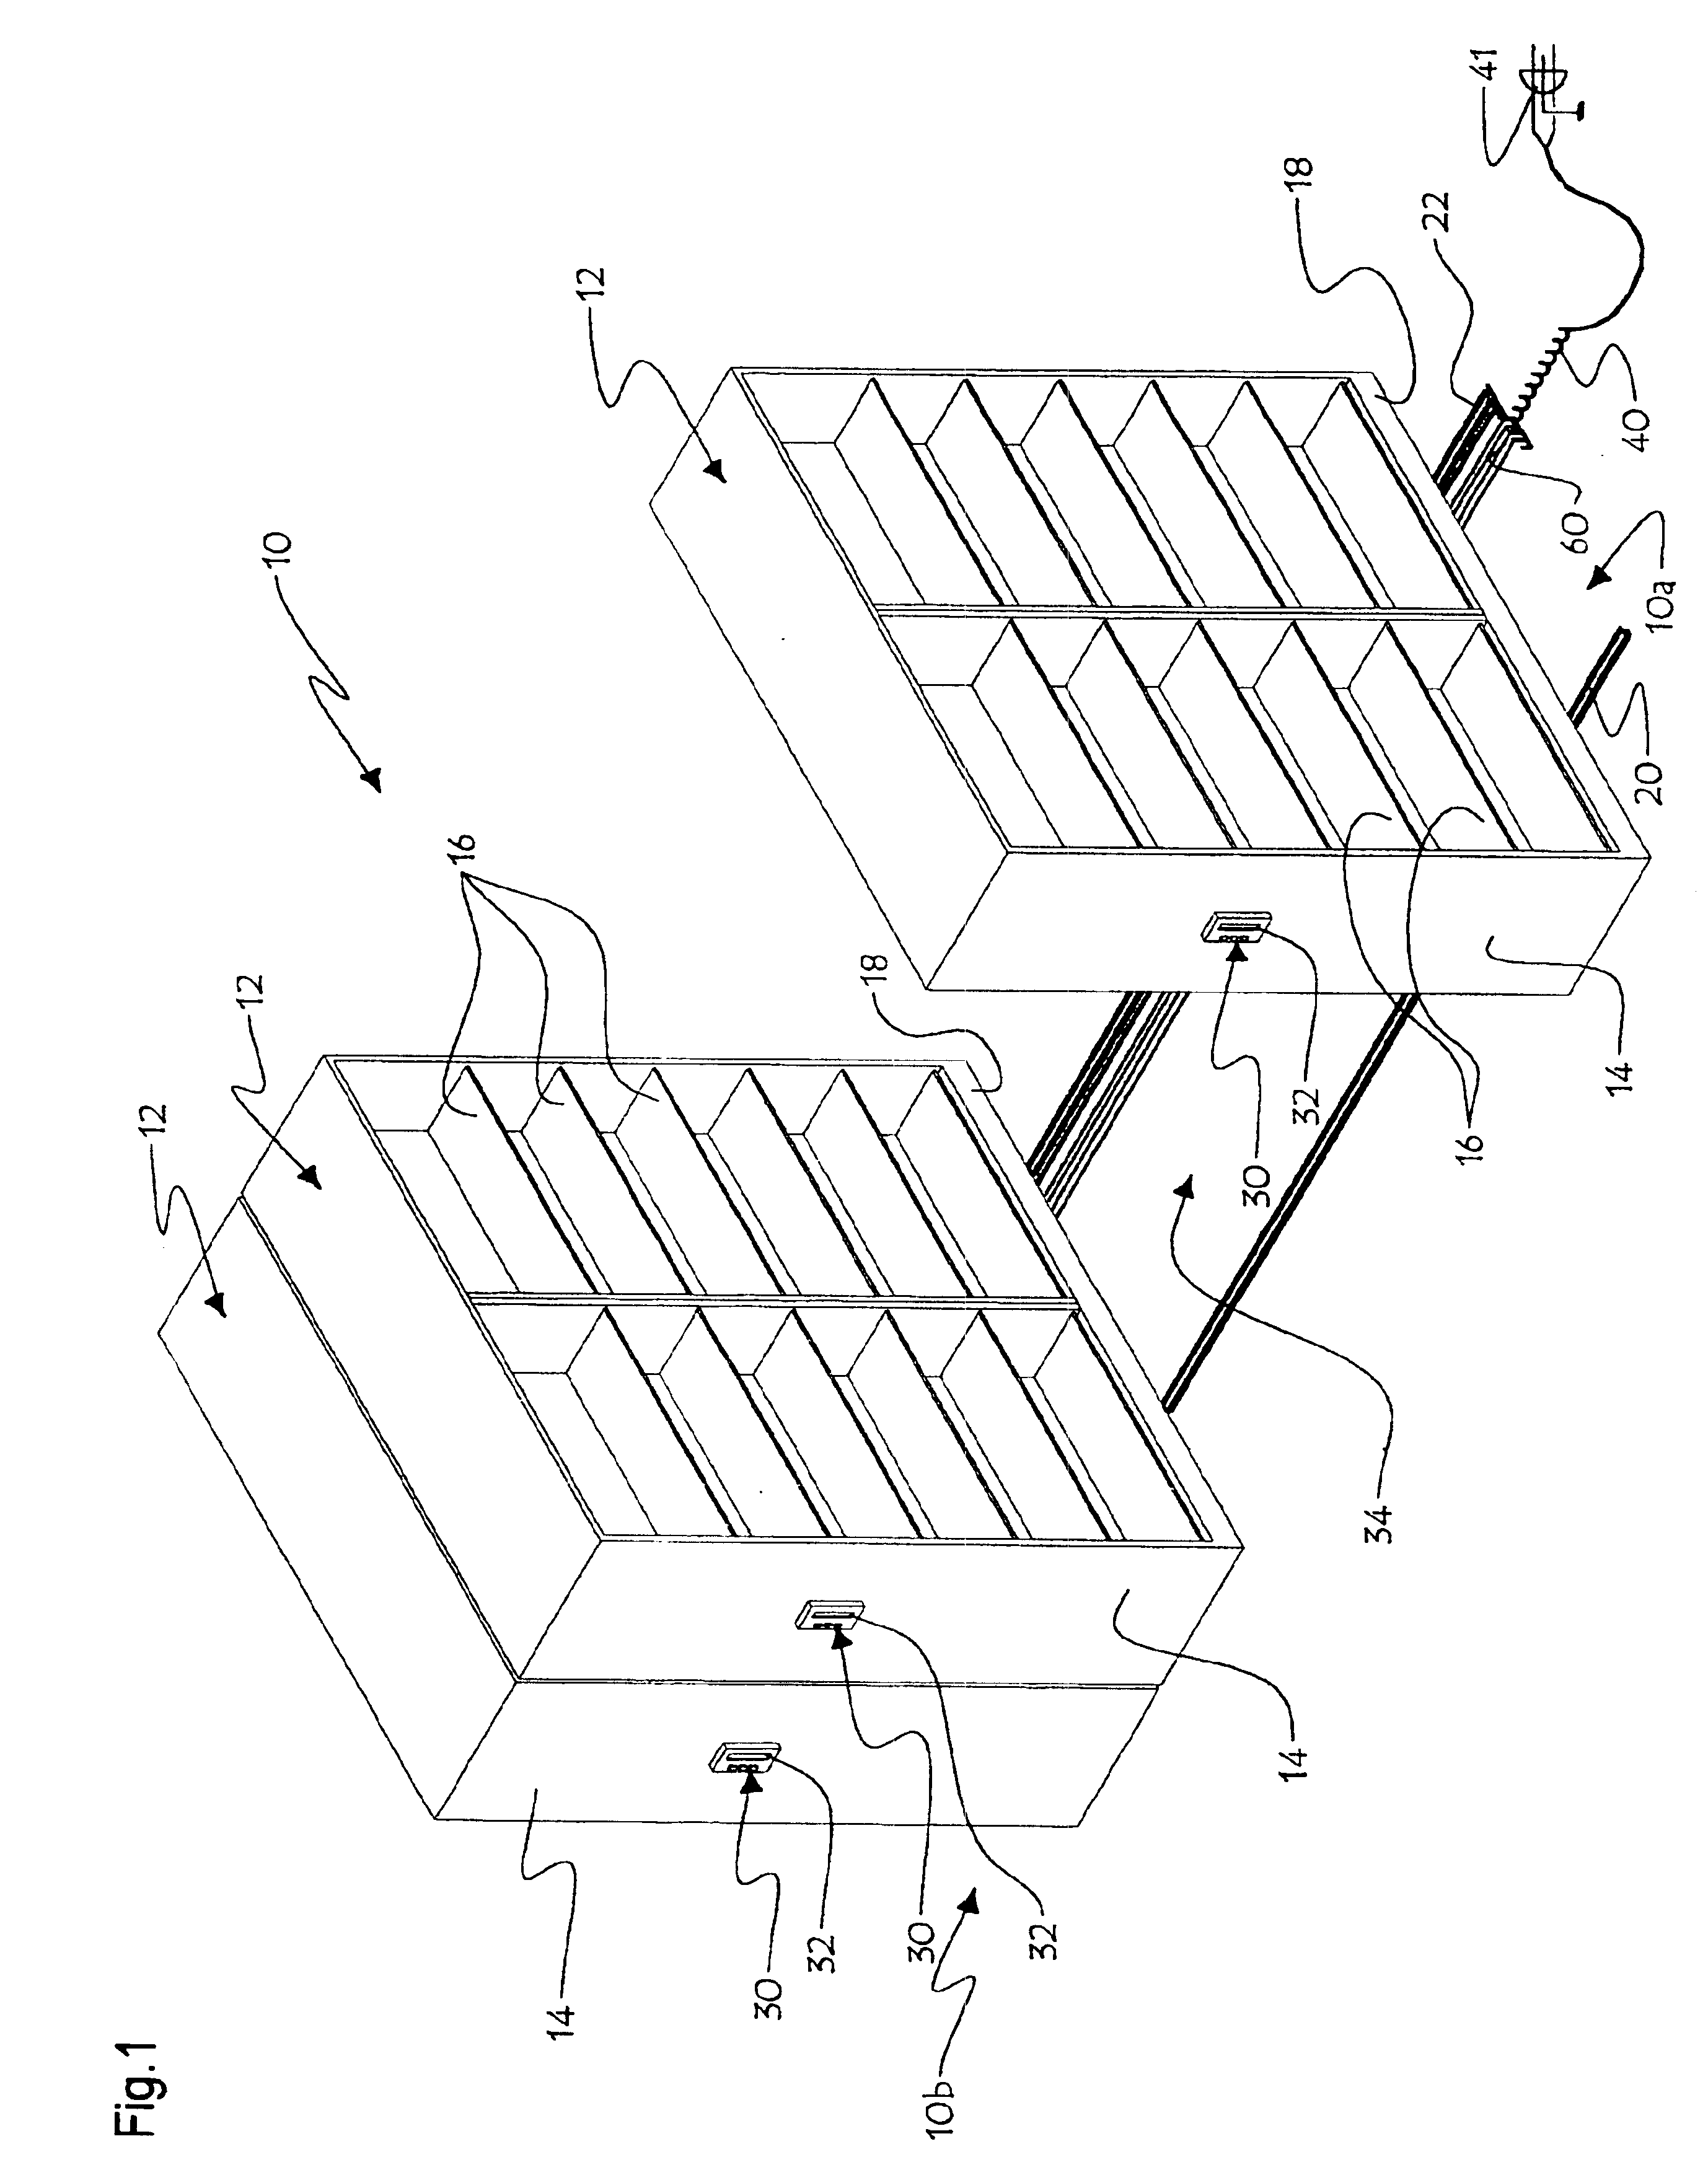 Ground embedded wire tracks for a shelving system having mobile shelf units